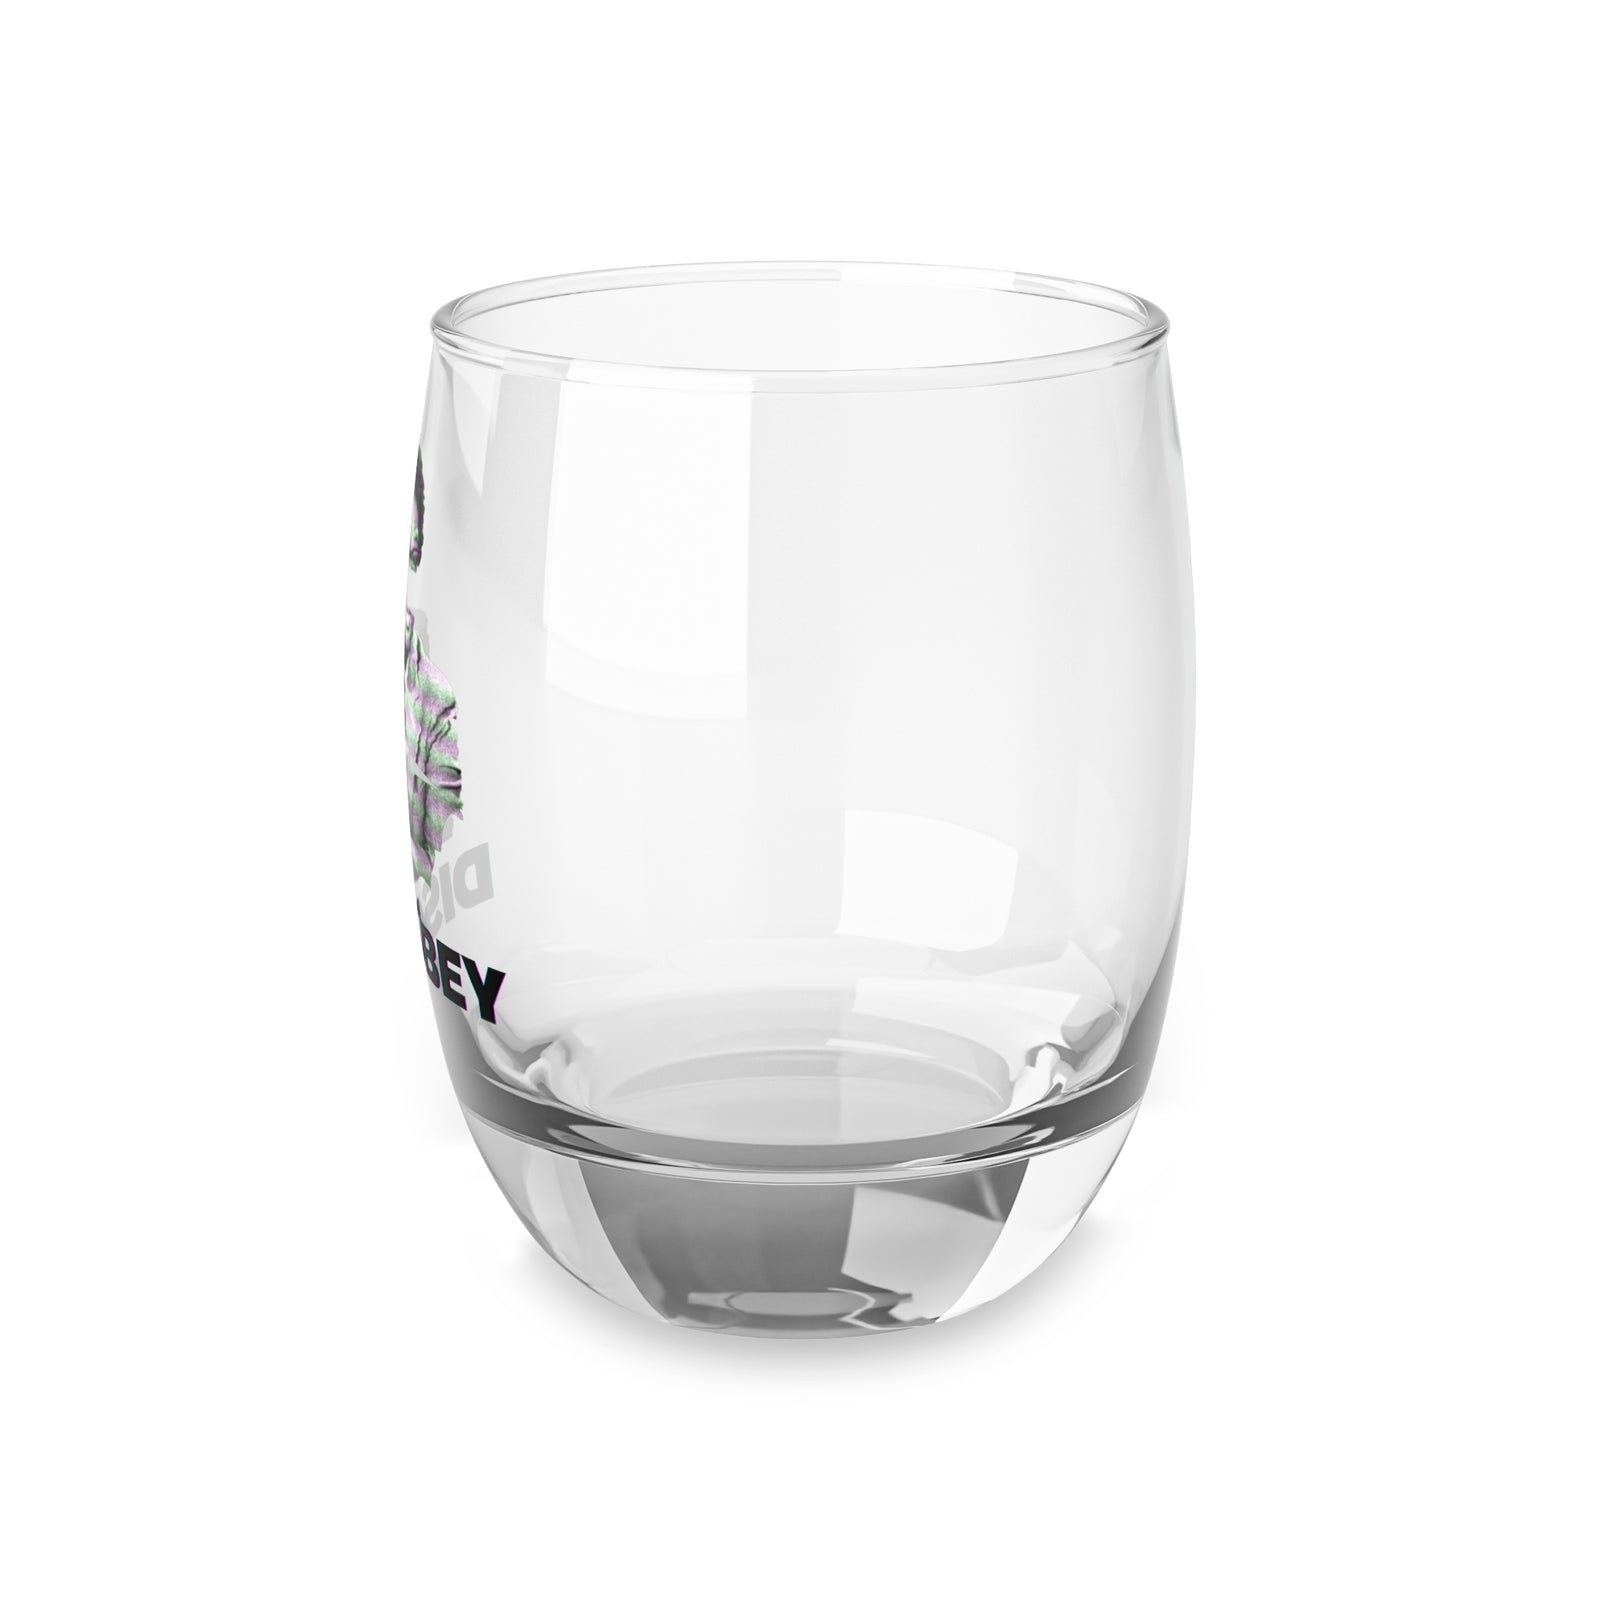 Thomas Sowell Disobey Whiskey Glass